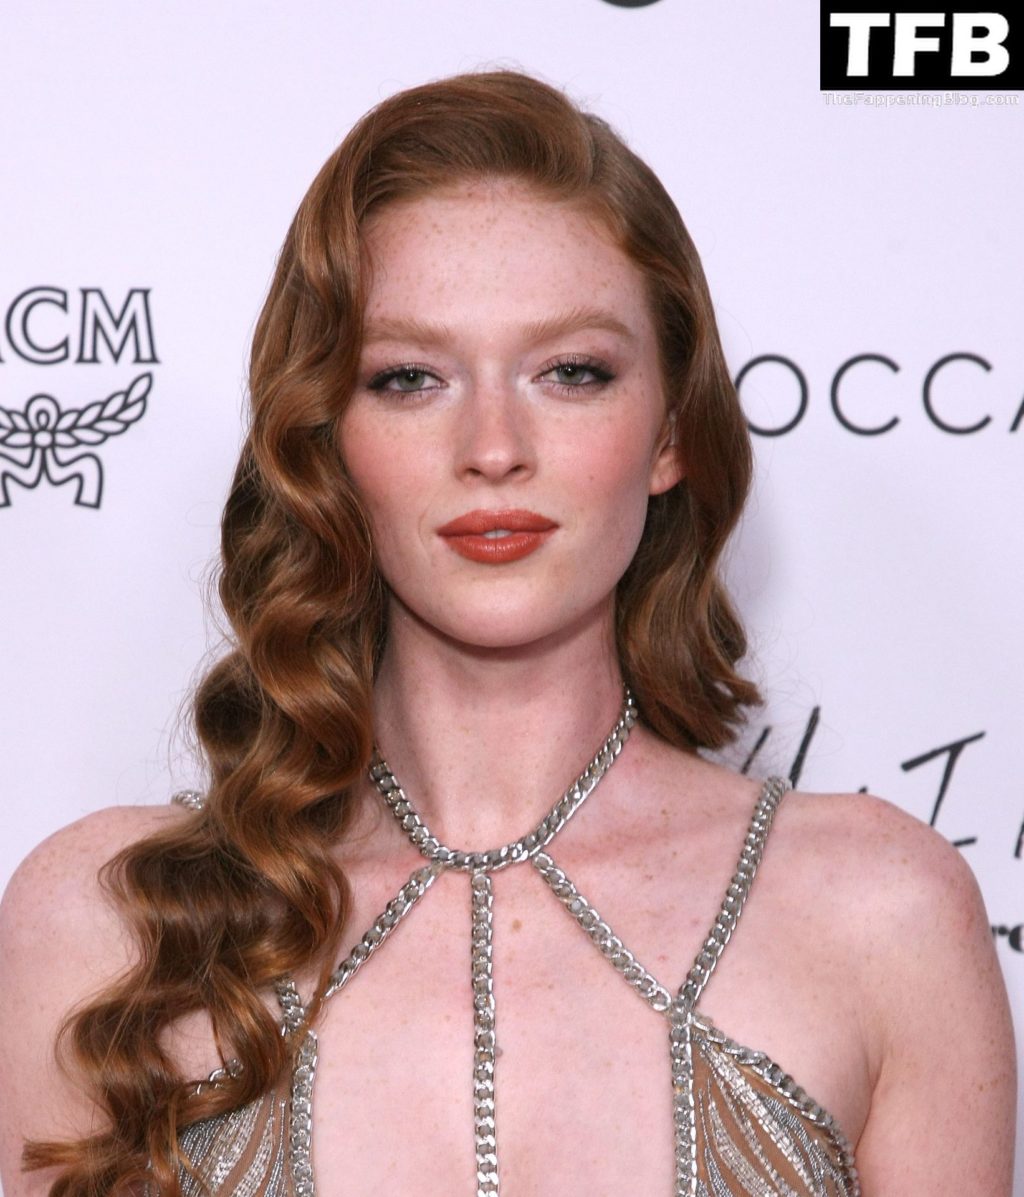 Larsen Thompson Looks Hot at the 6th Annual Fashion Los Angeles Awards (22 Photos)